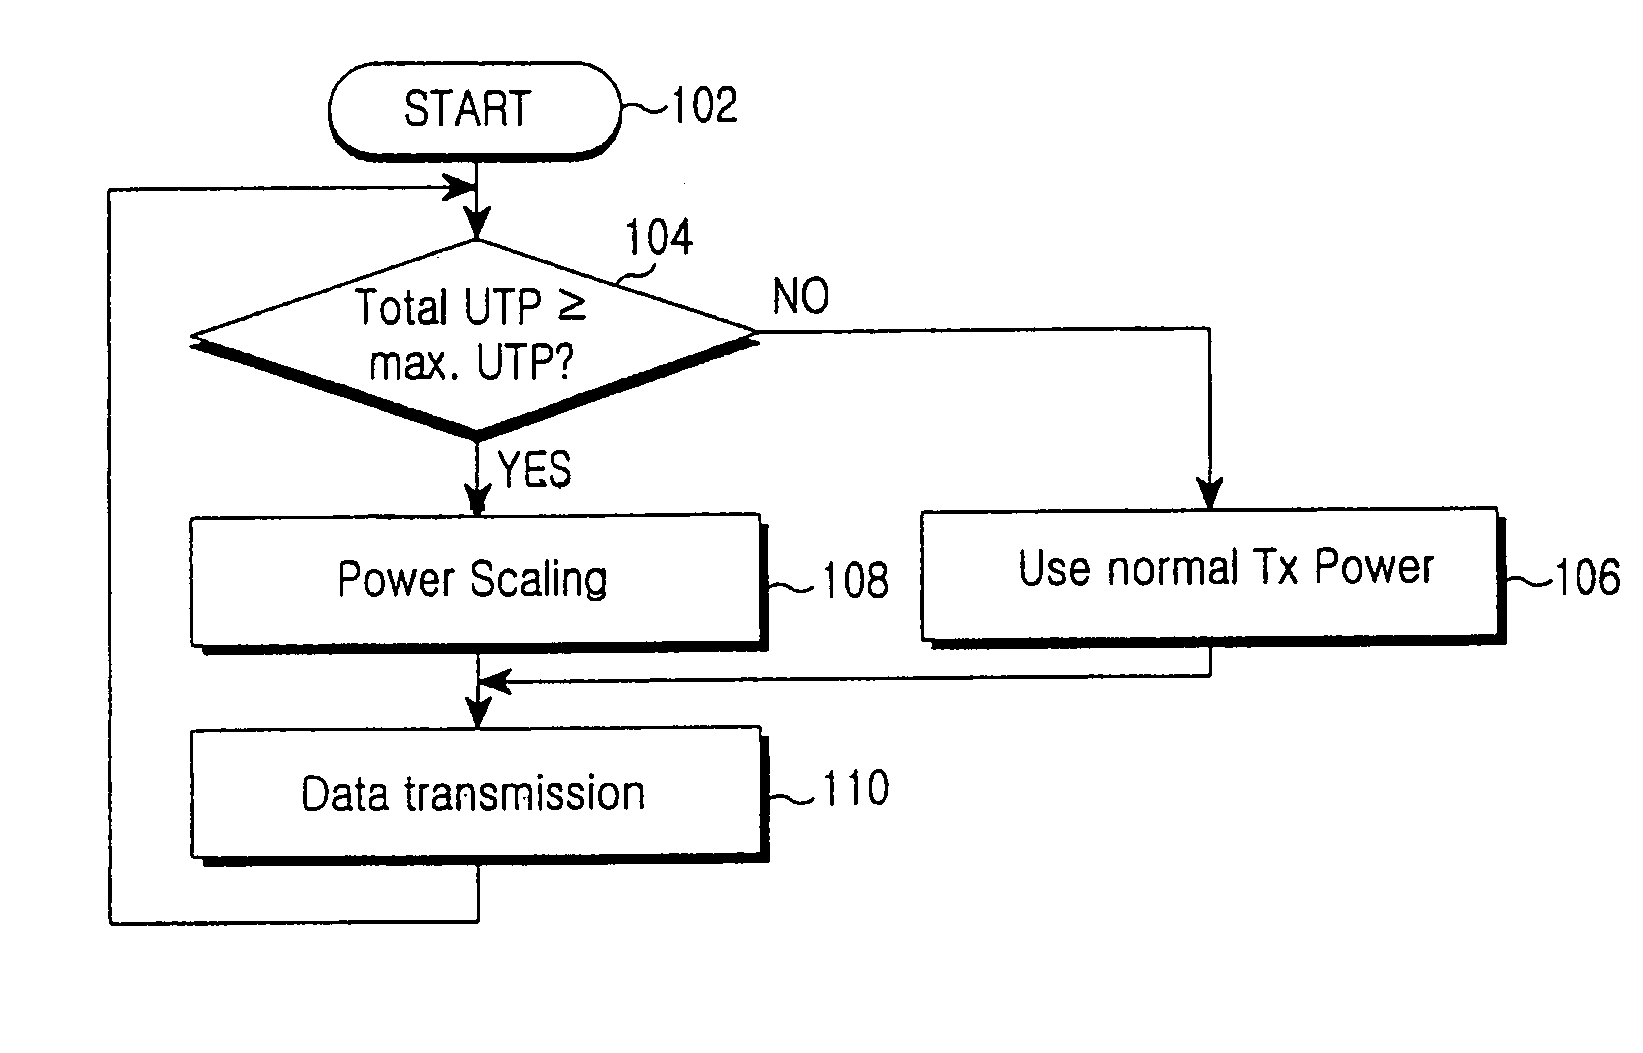 Apparatus and a method for distributing a transmission power in a cellular communications network